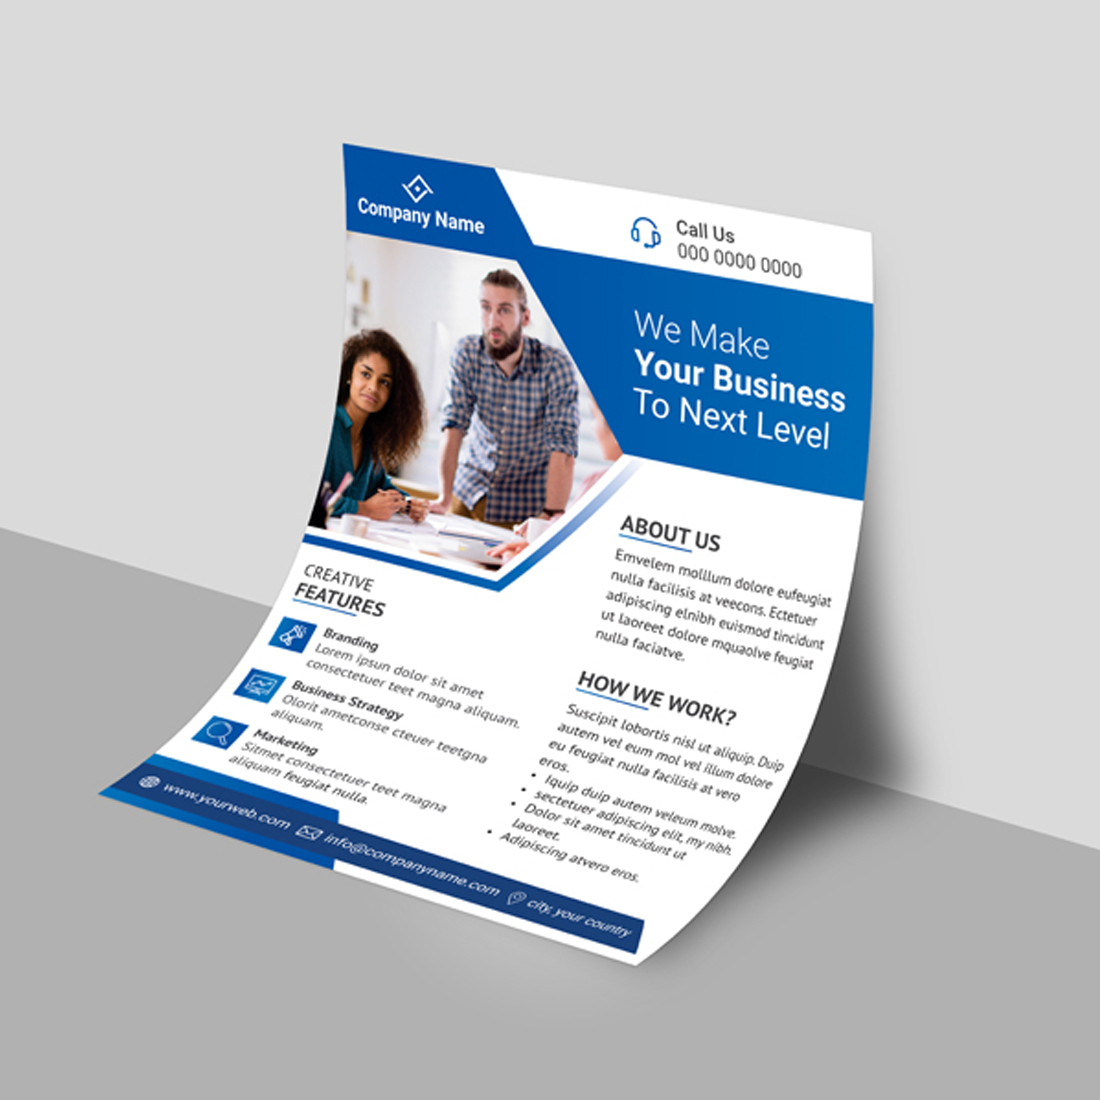 Corporate Design Flyer Template cover image.